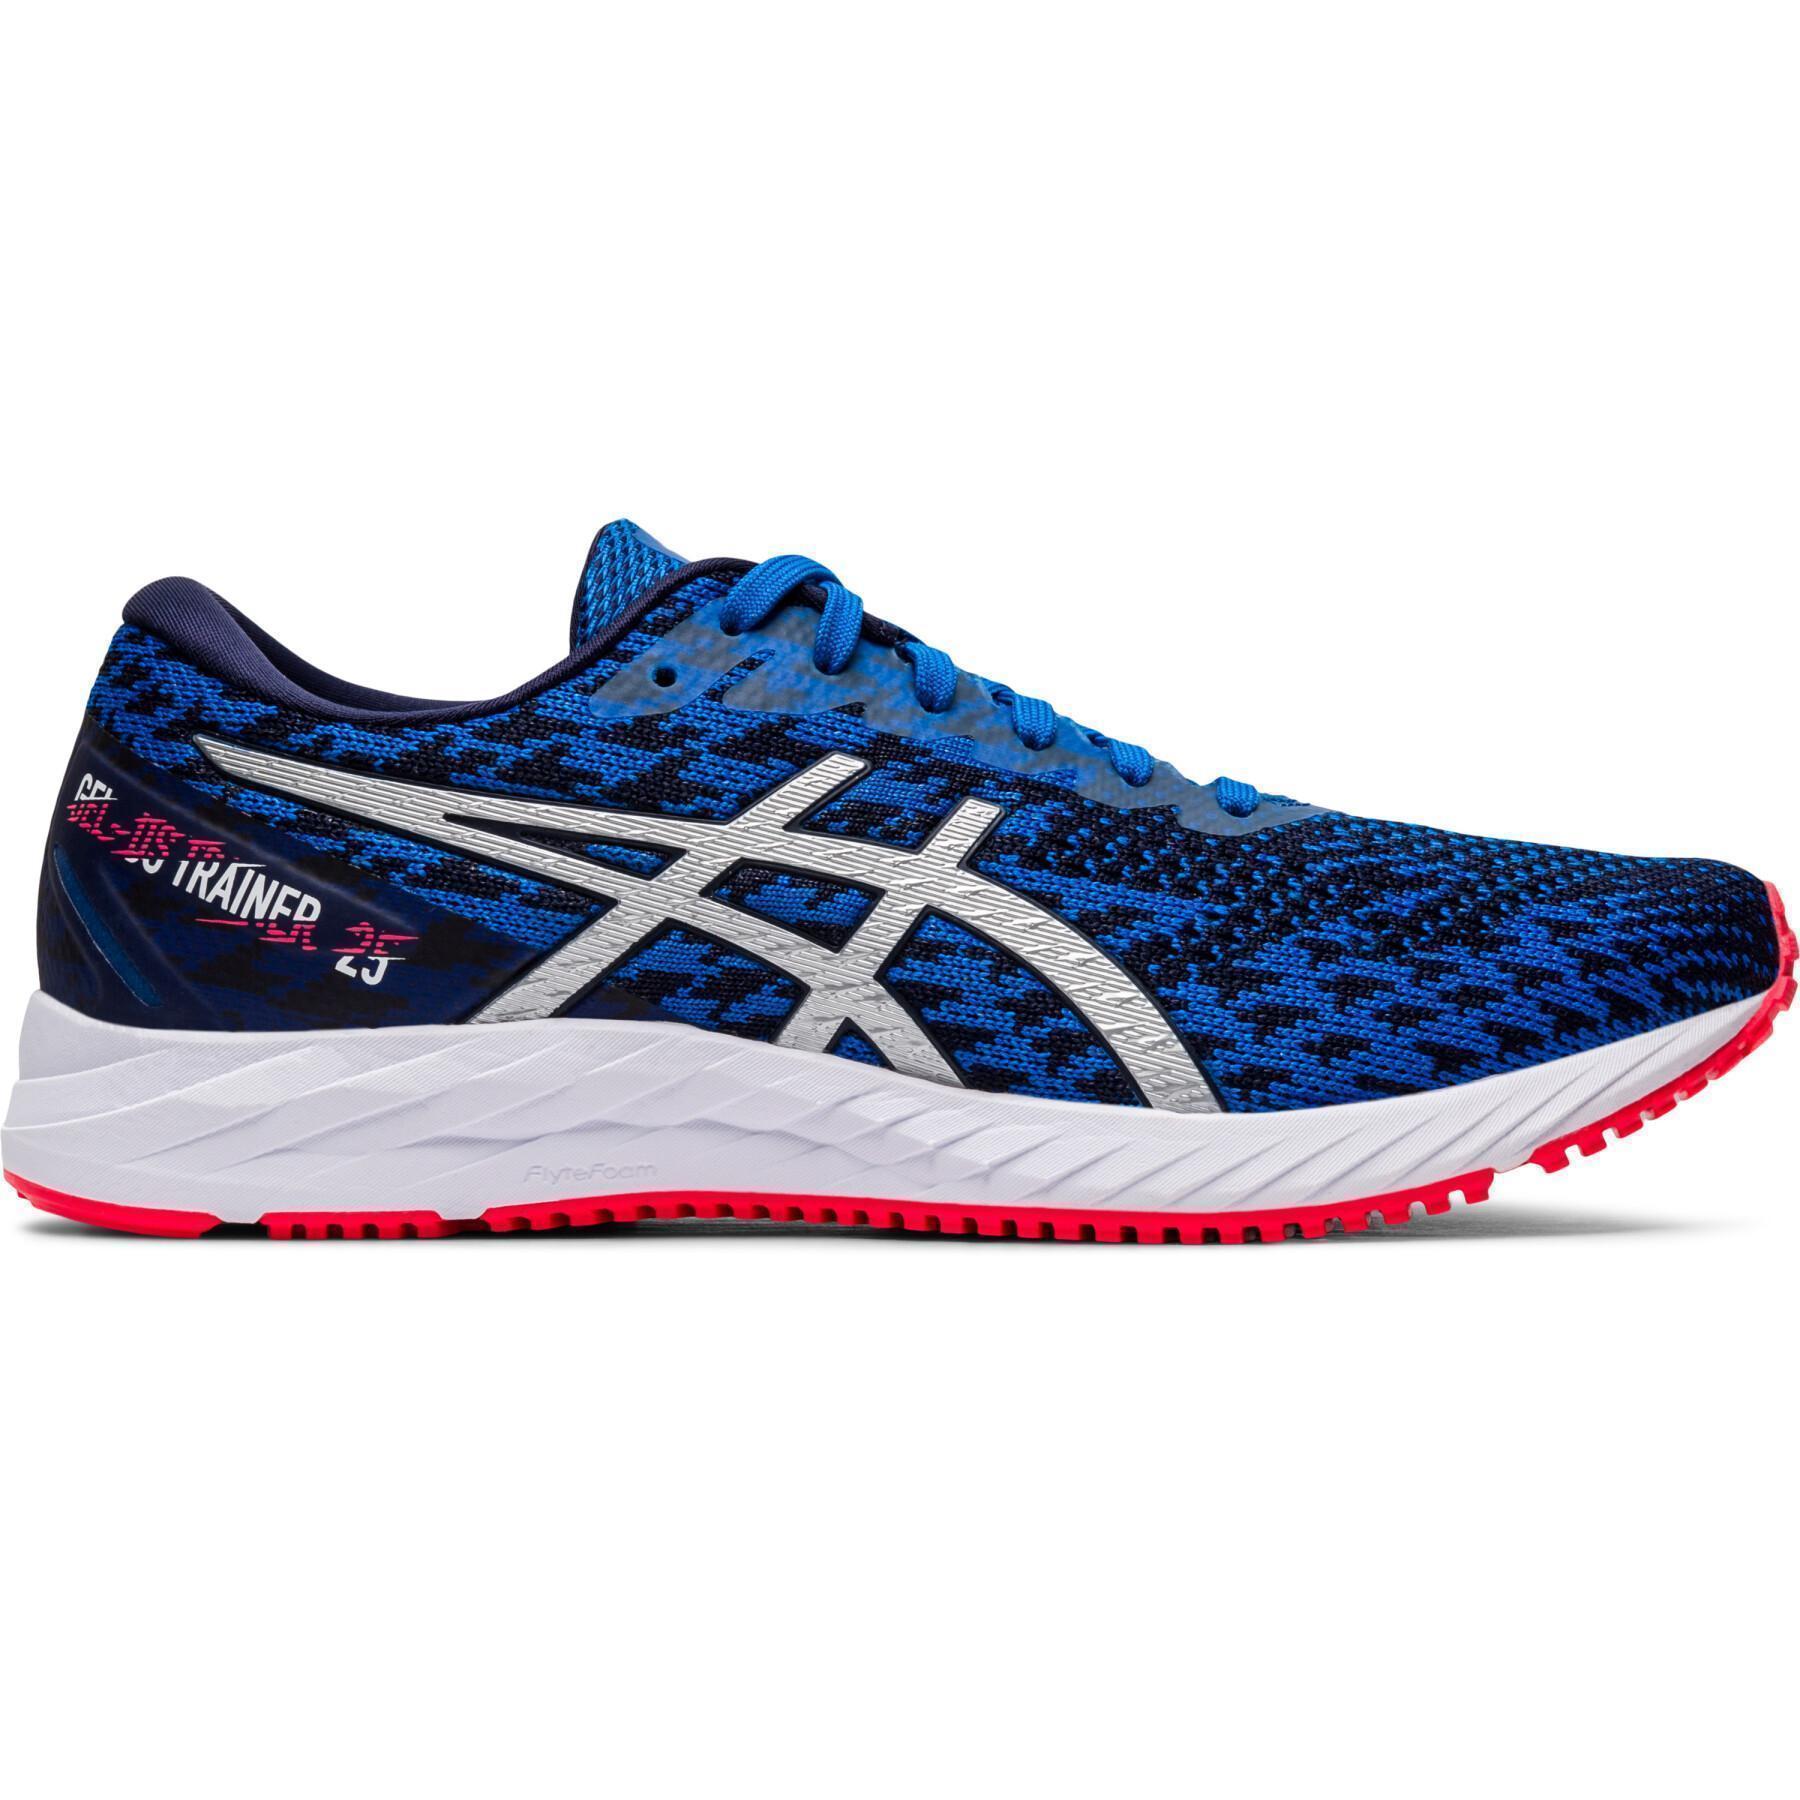 Zapatos de mujer Asics Gel-Ds Trainer 25